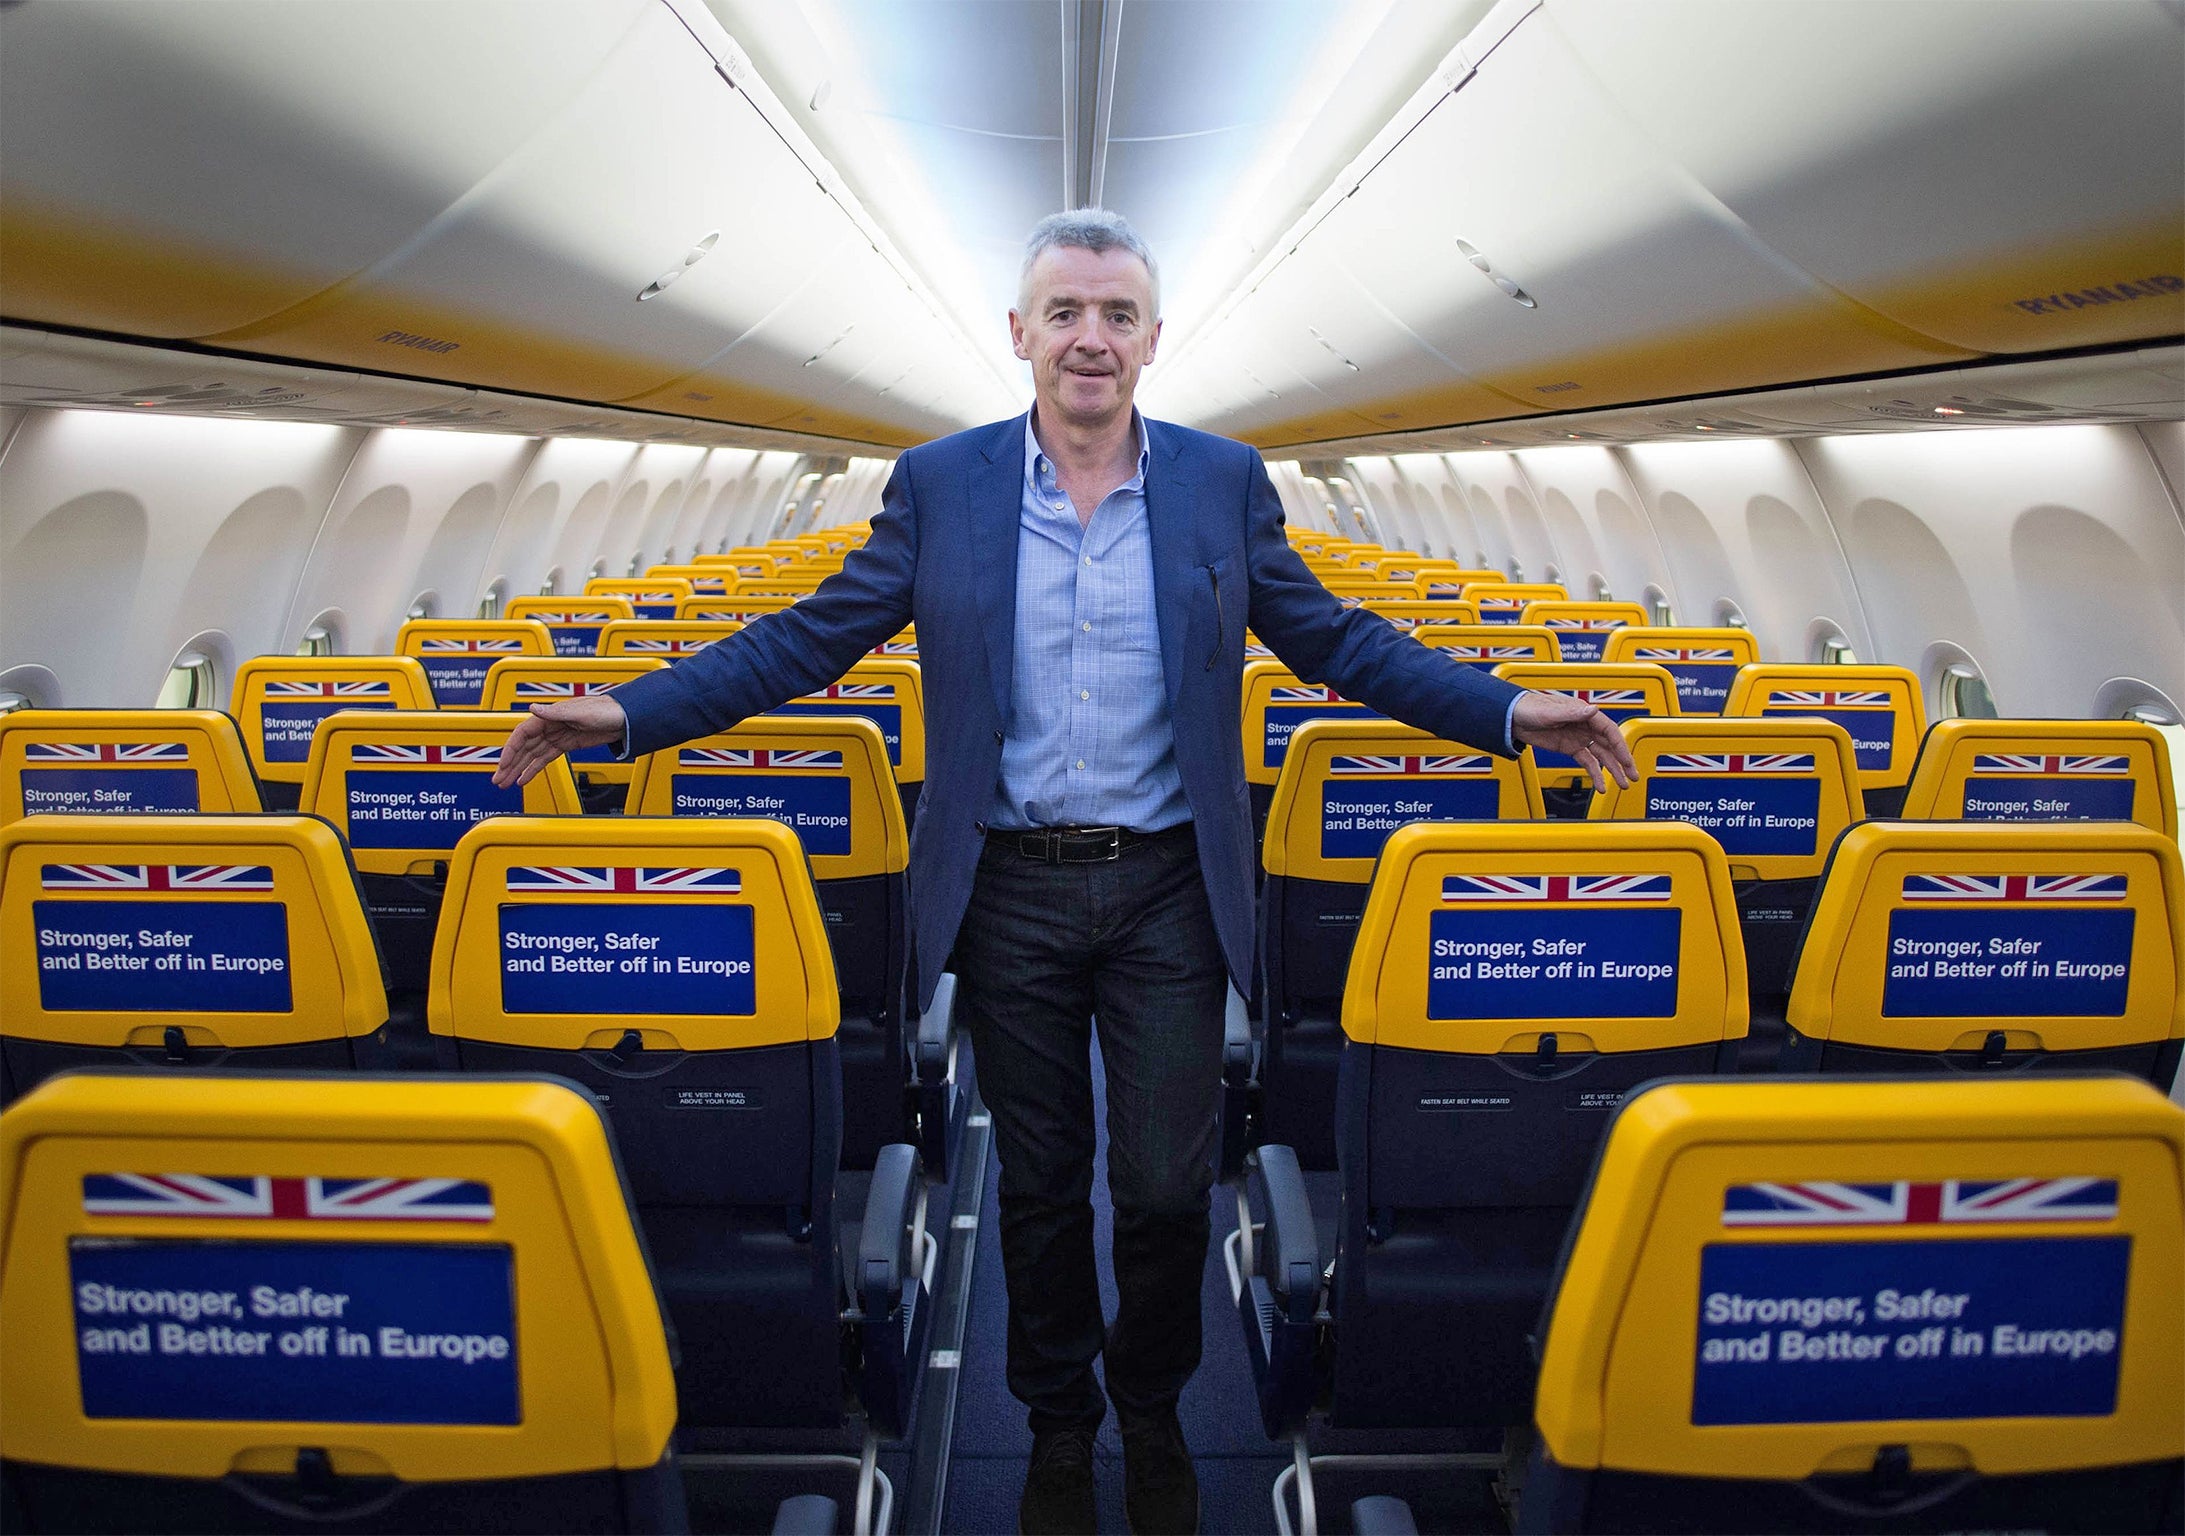 Ryanair chief executive Michael O'Leary has plastered pro-EU slogans on the seats of his fleet